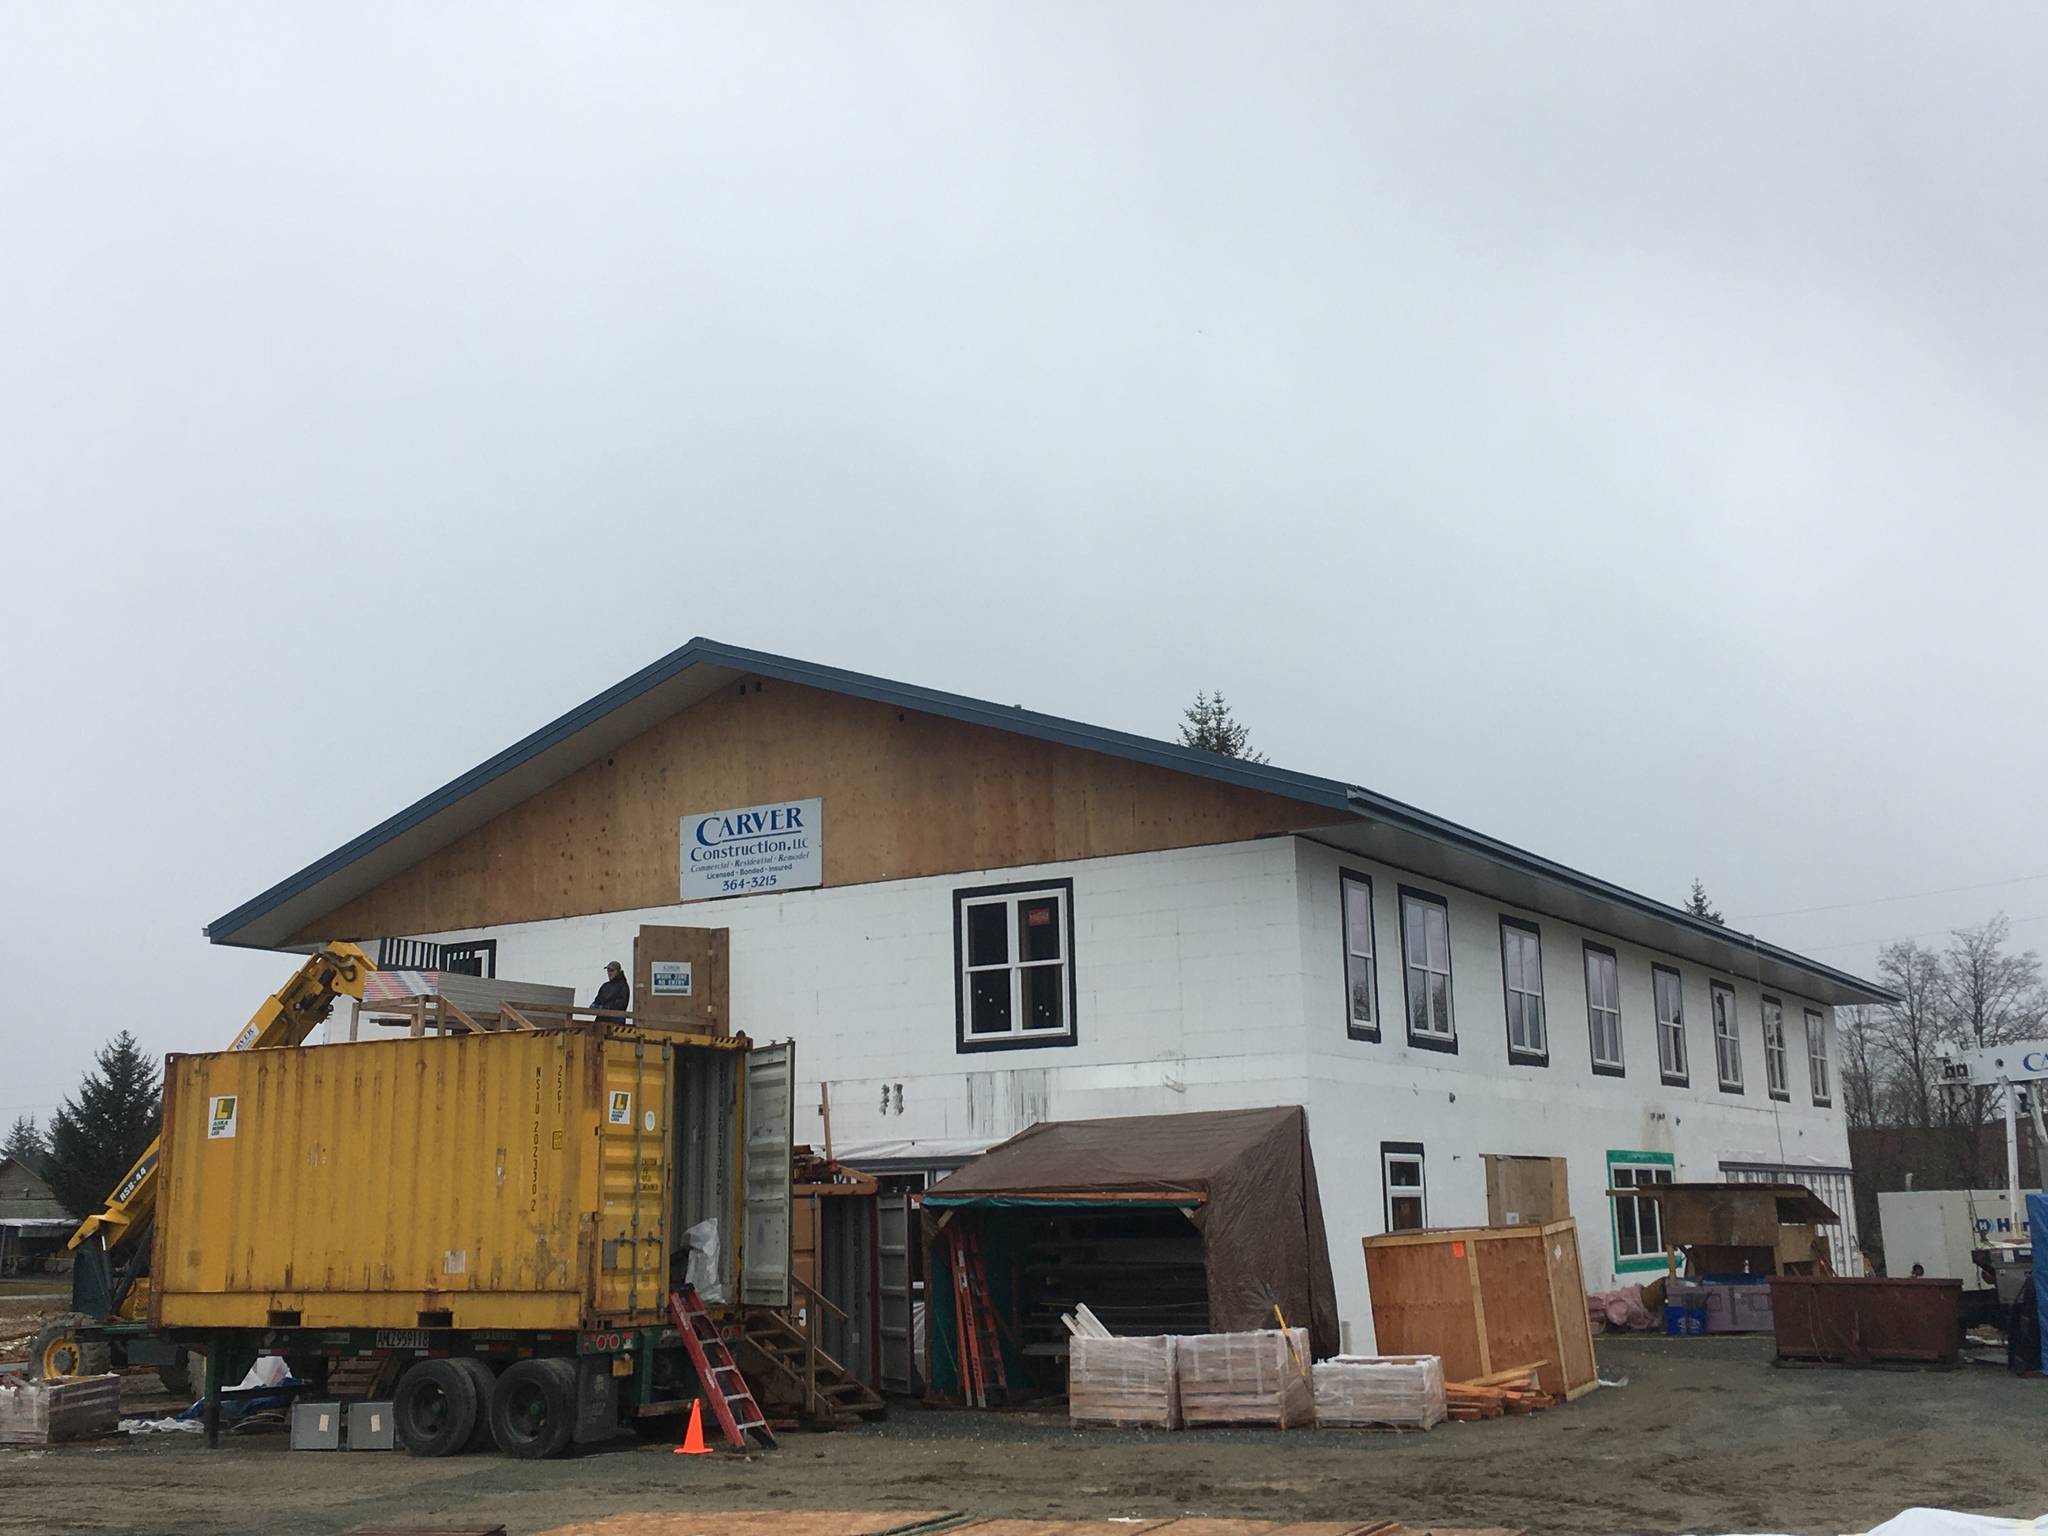 The new Glory Hall, currently under construction near the airport, is due to open on July 1, 2021, as the contract for the shelter at the Juneau Arts and Culture Center ends after a year and a half of pandemic. (Michael S. Lockett / Juneau Empire)